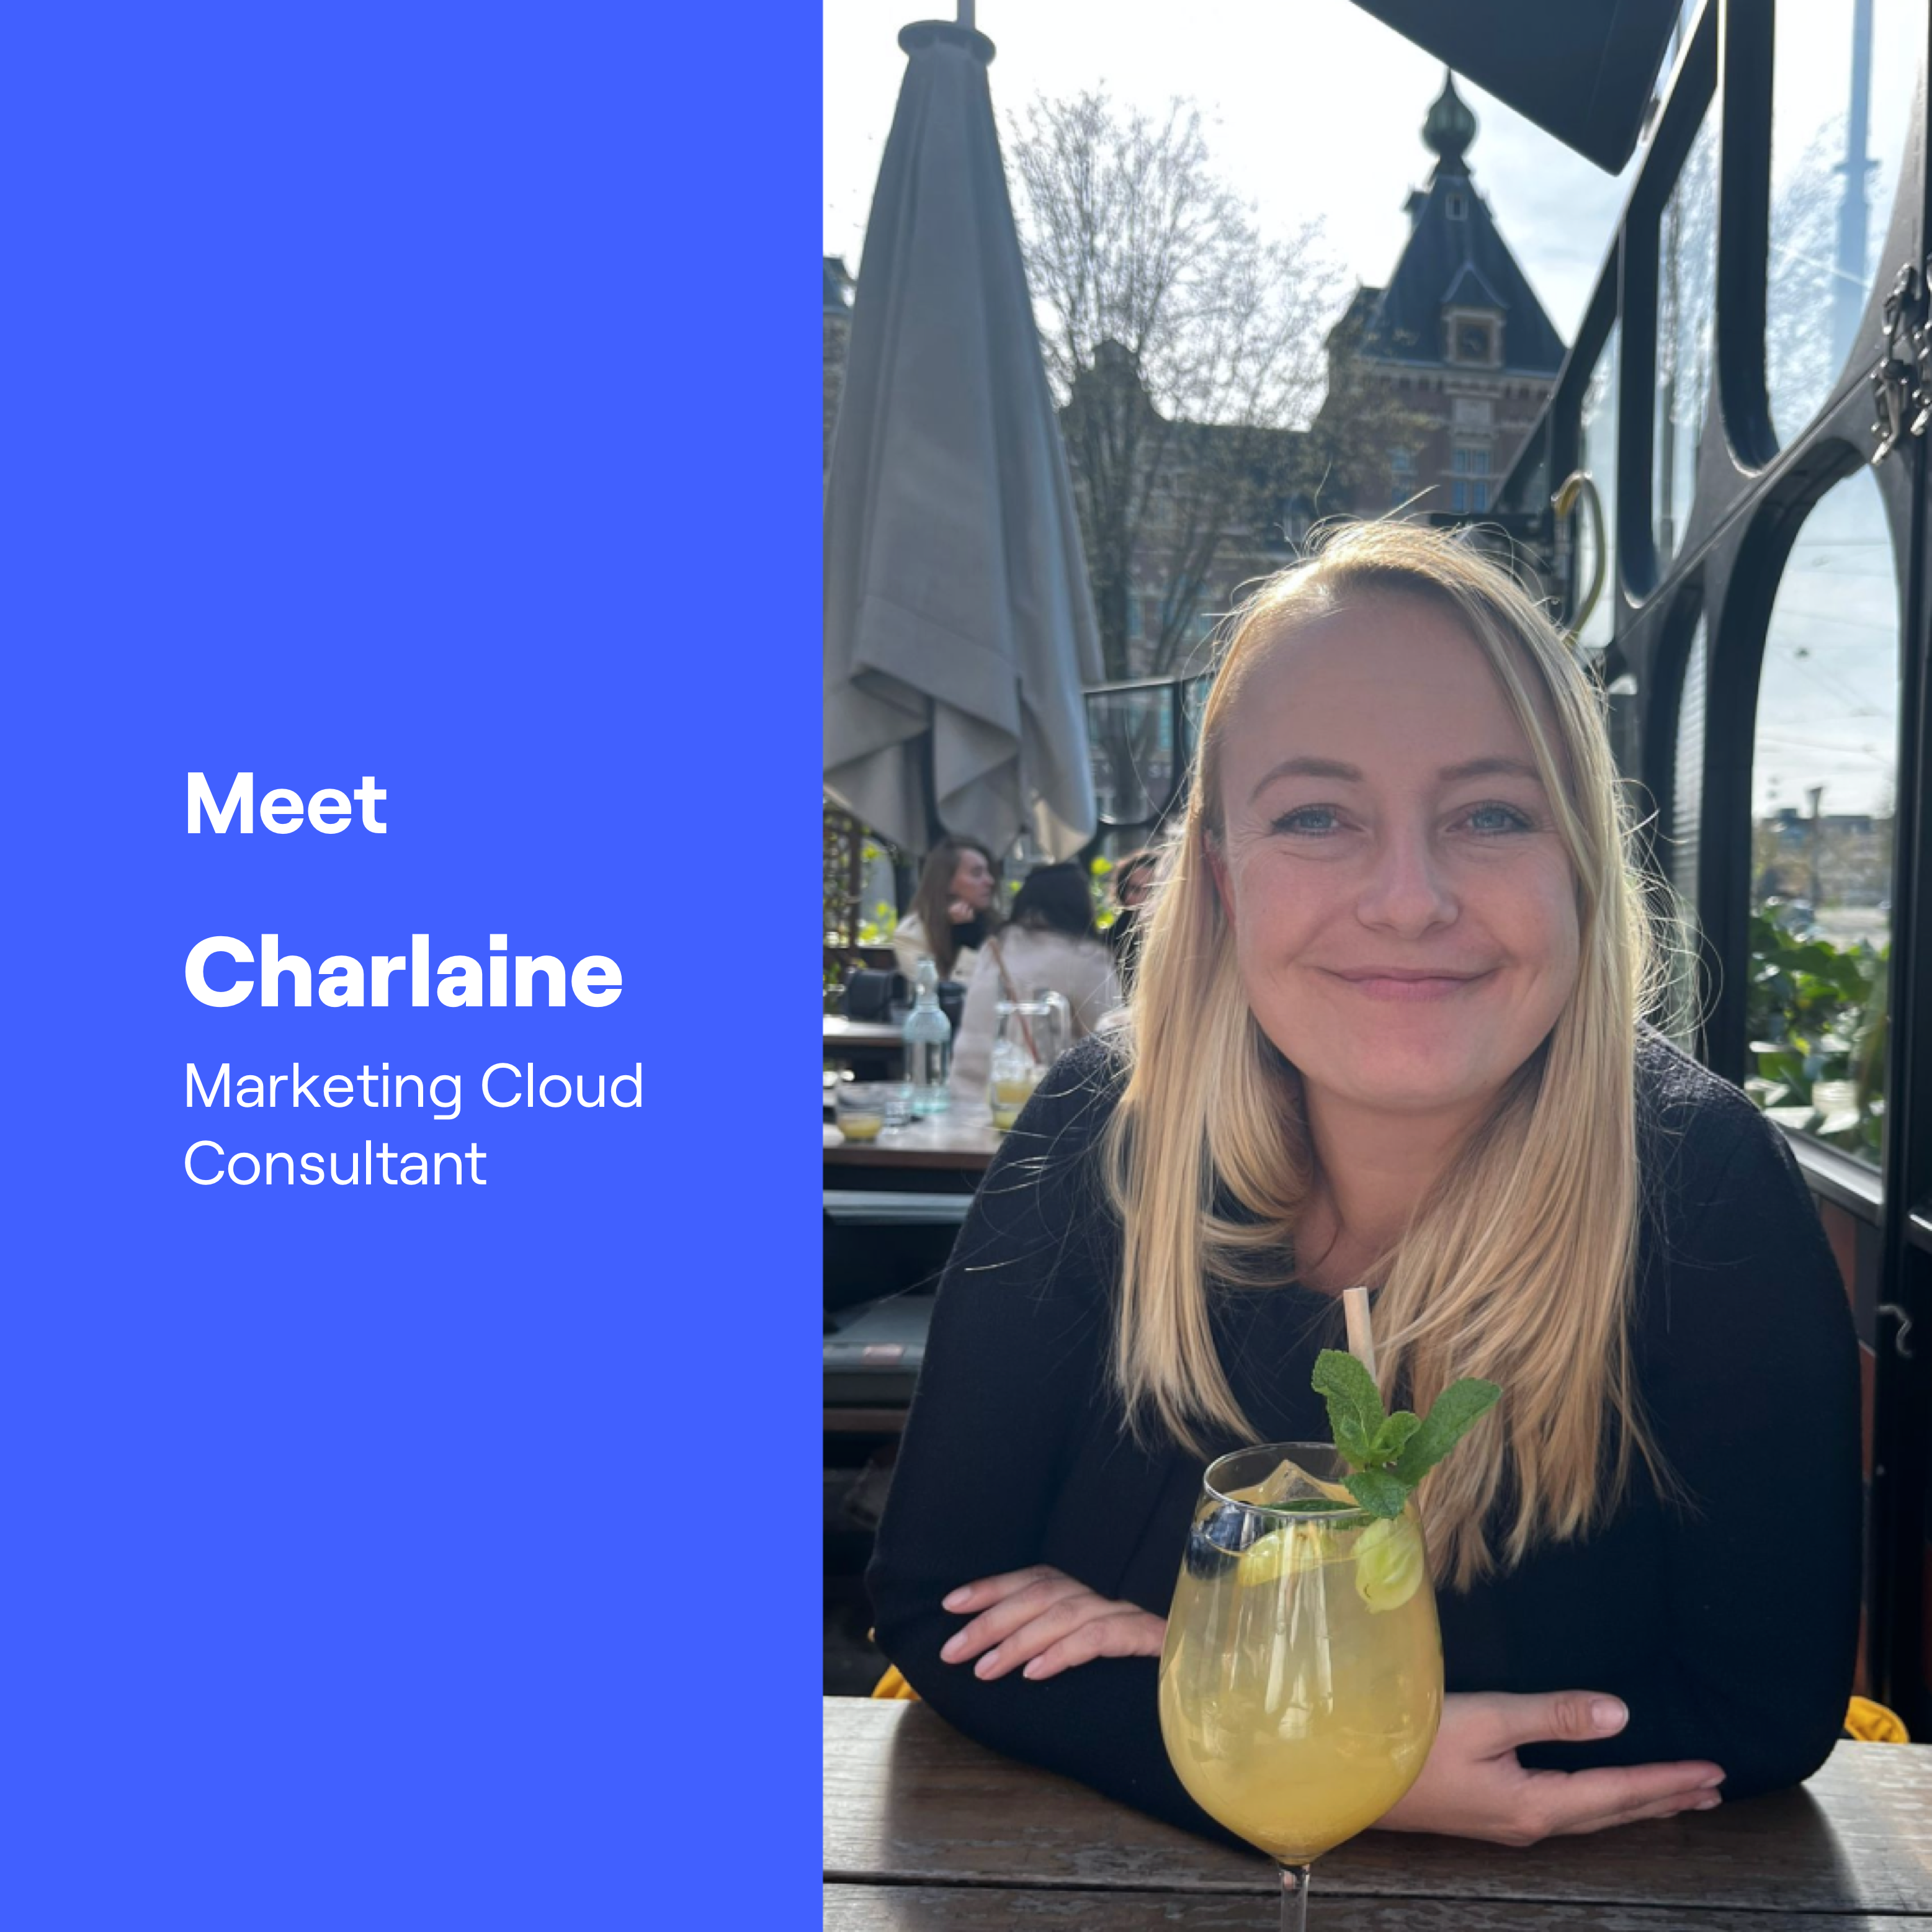 Marketing Cloud consultant Charlaine